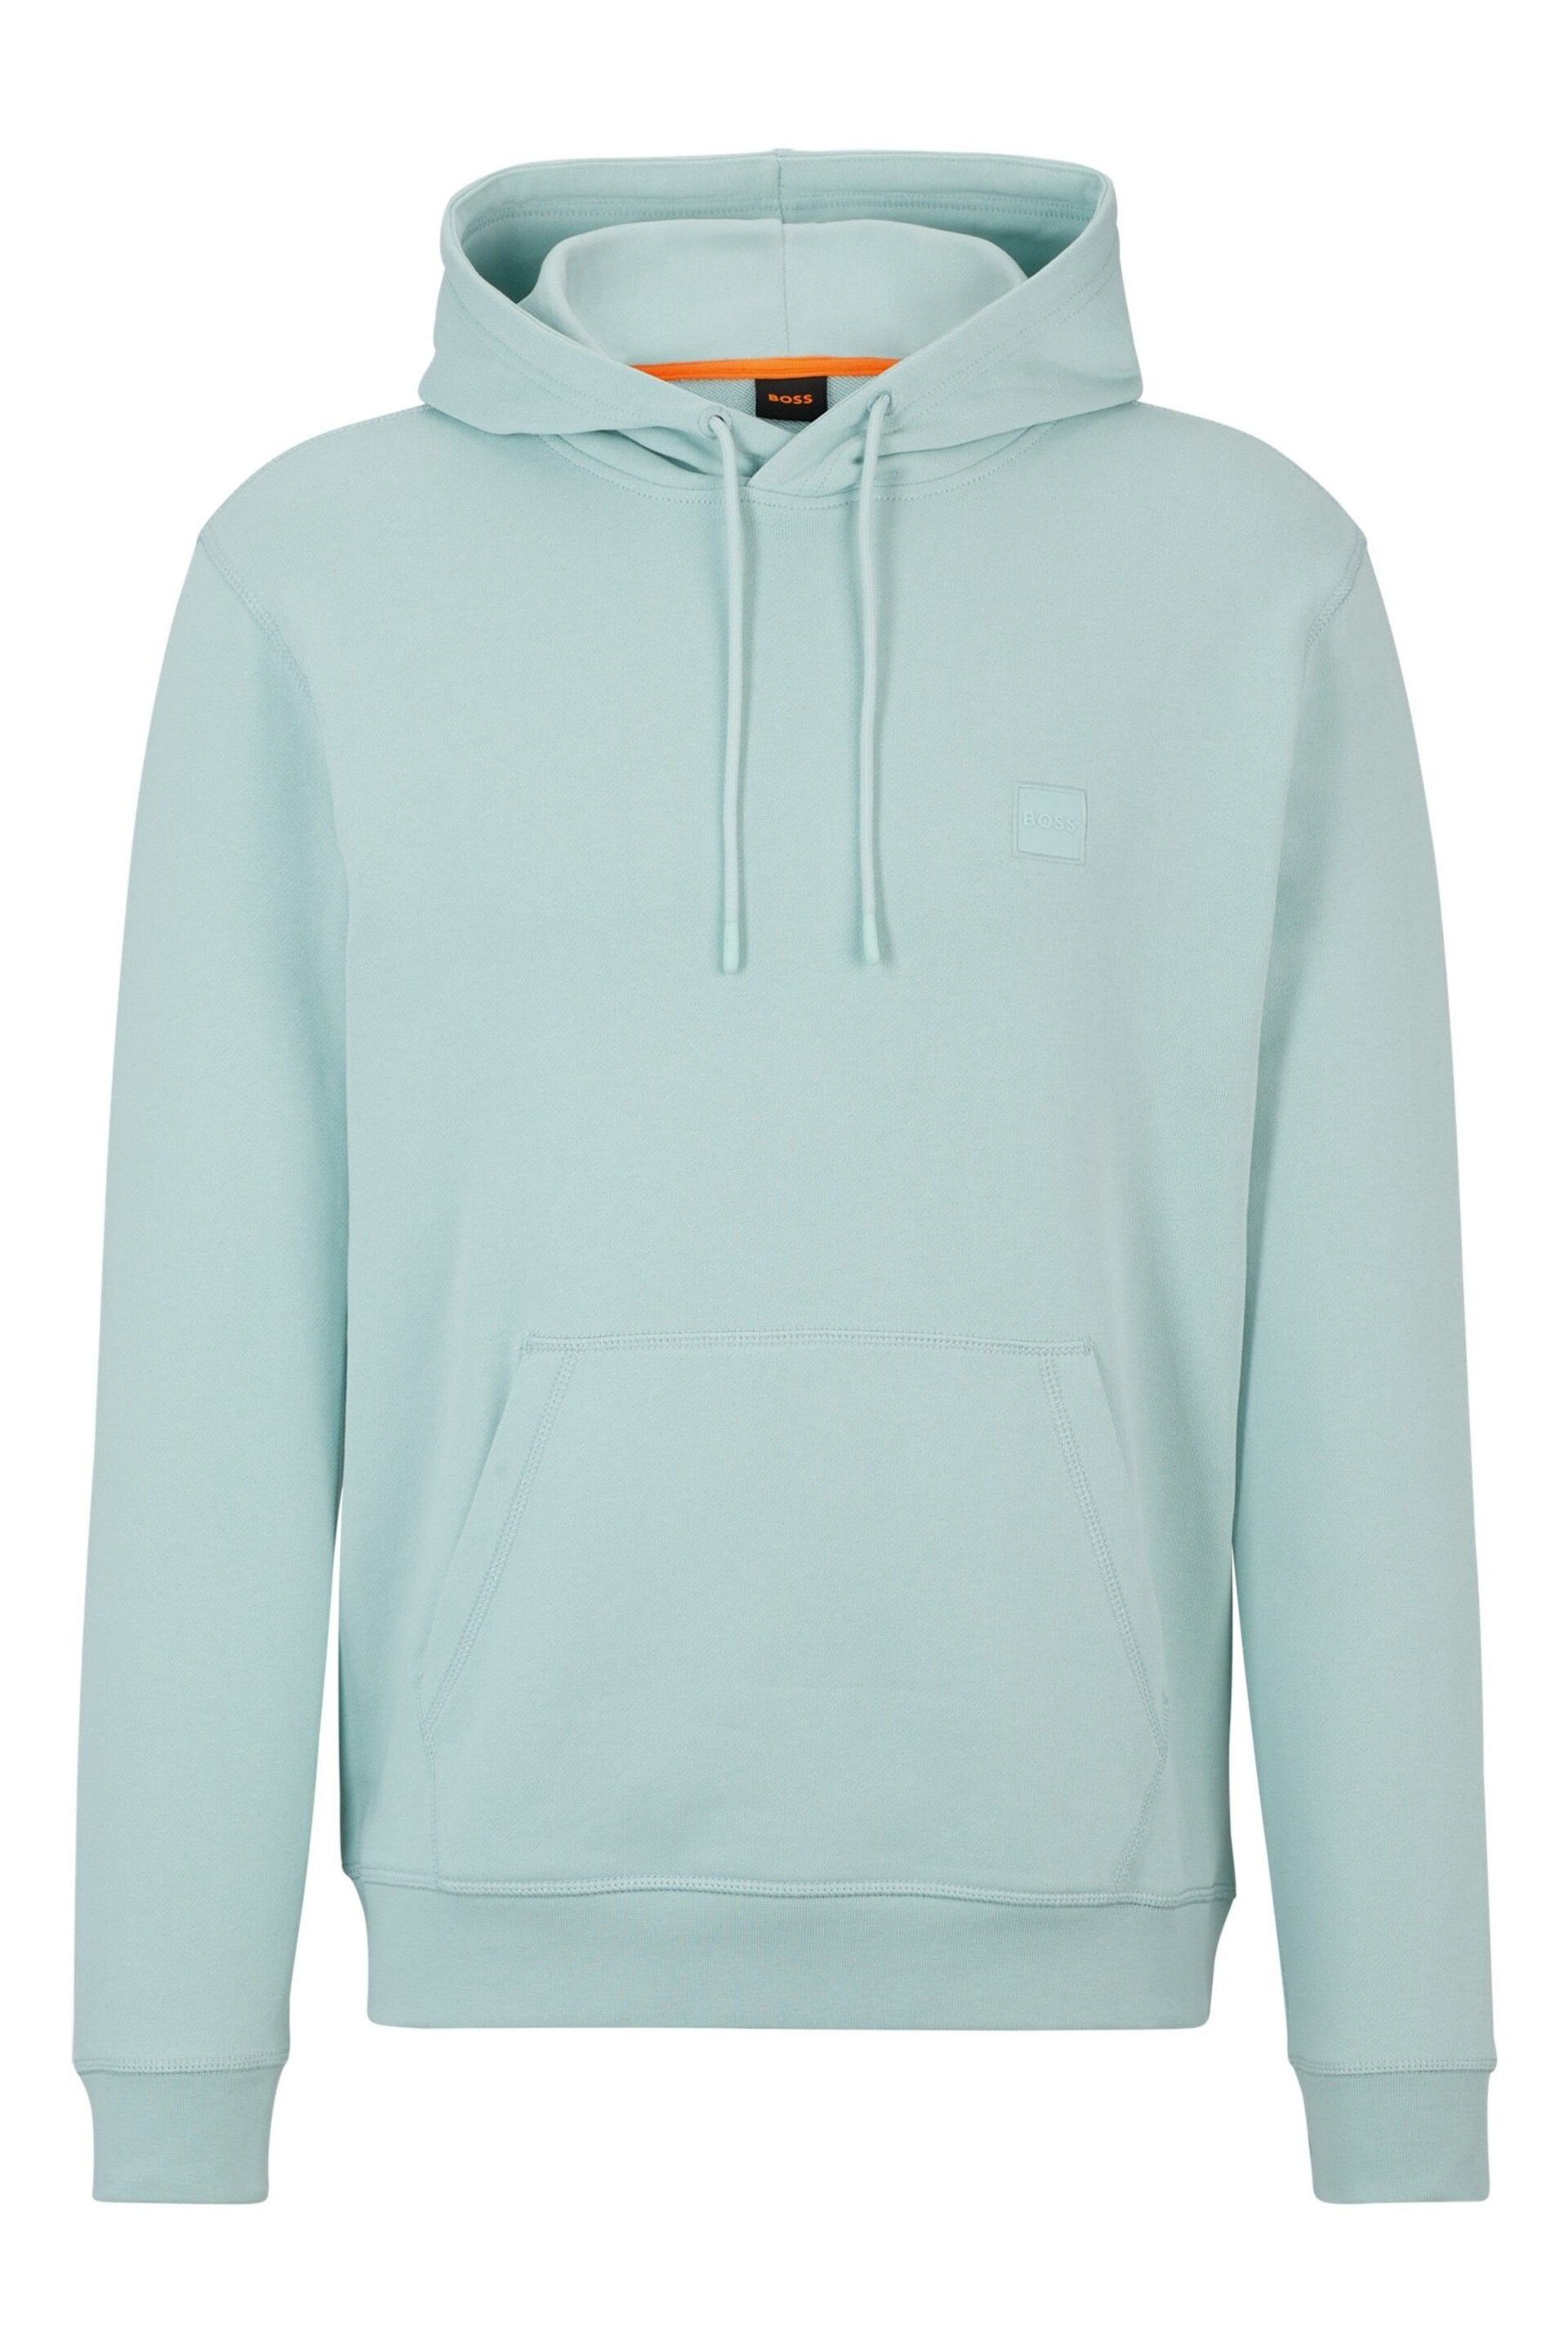 BOSS Blue Light Logo-Patch Hoodie In Cotton Terry - Image 5 of 6